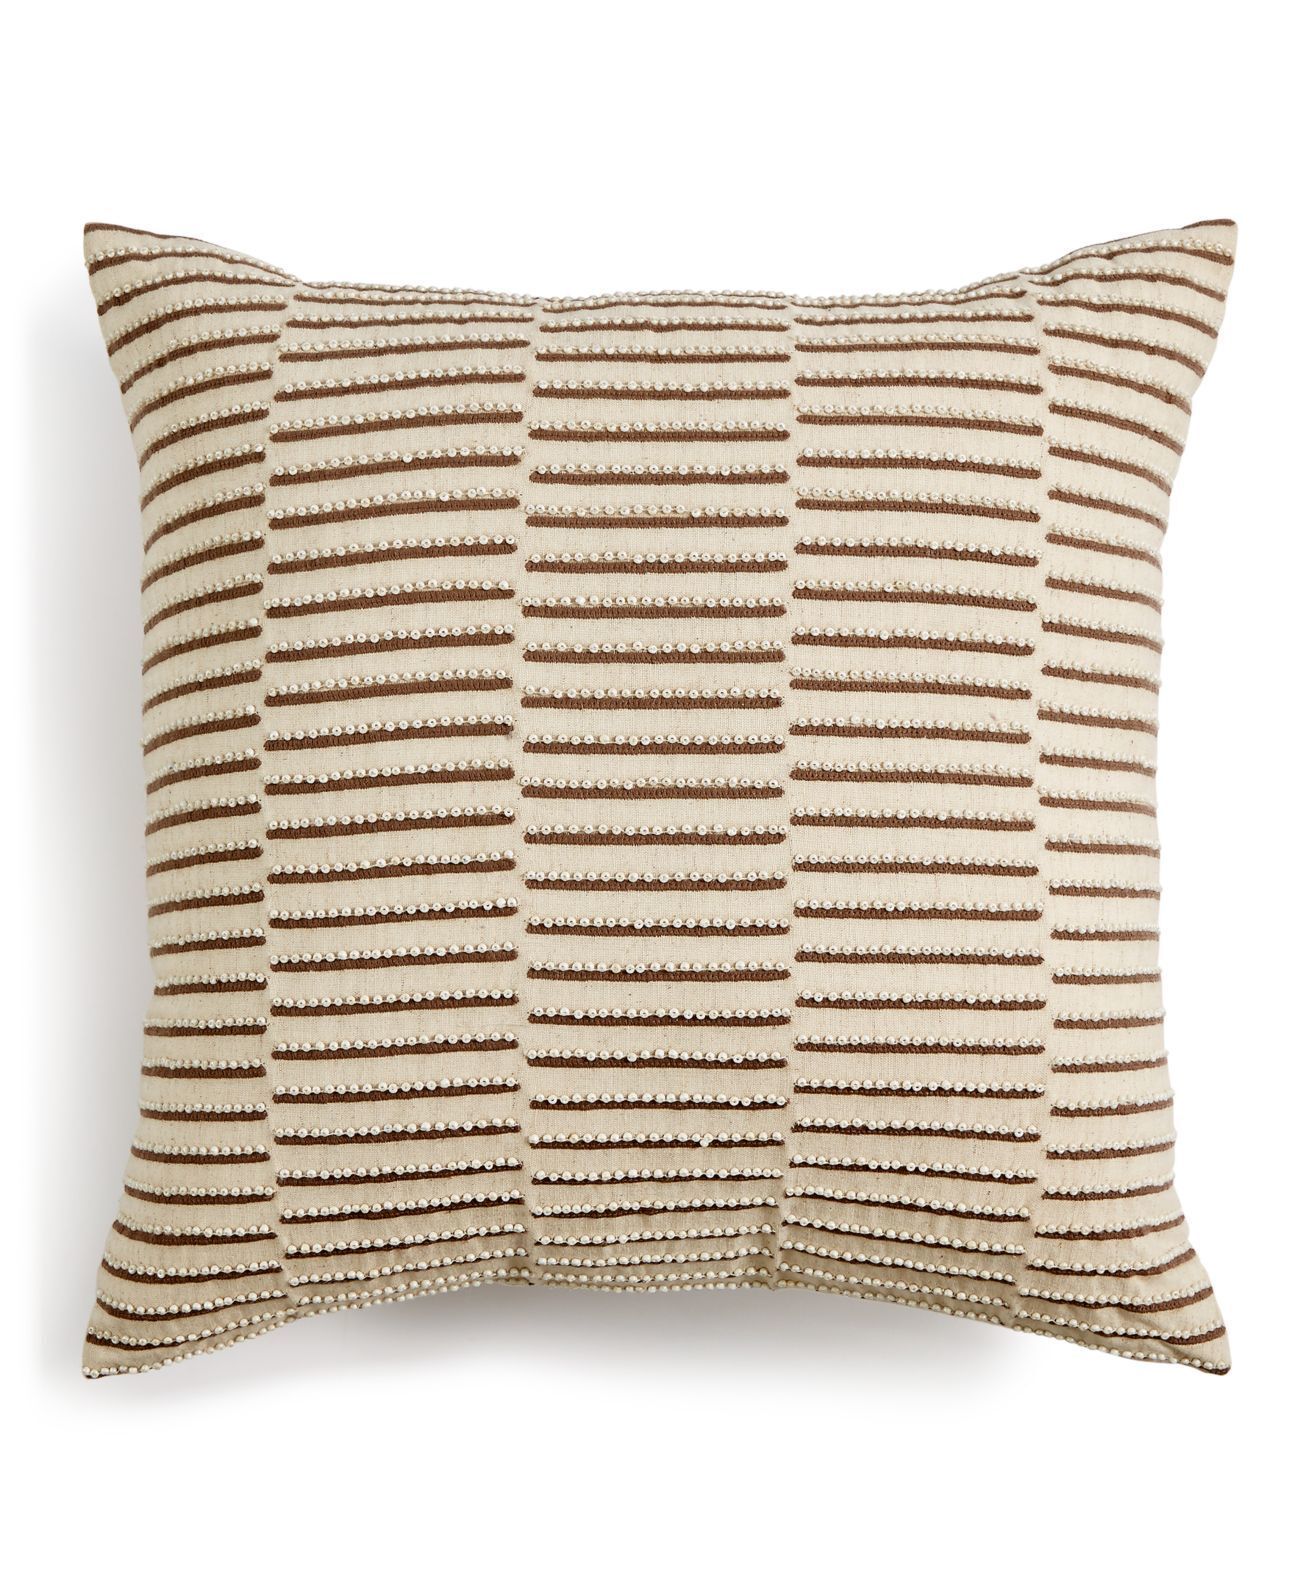 Hotel Collection Honeycomb Decorative Throw Pillow Size 18 x 18 Color Oatmeal - $89.99